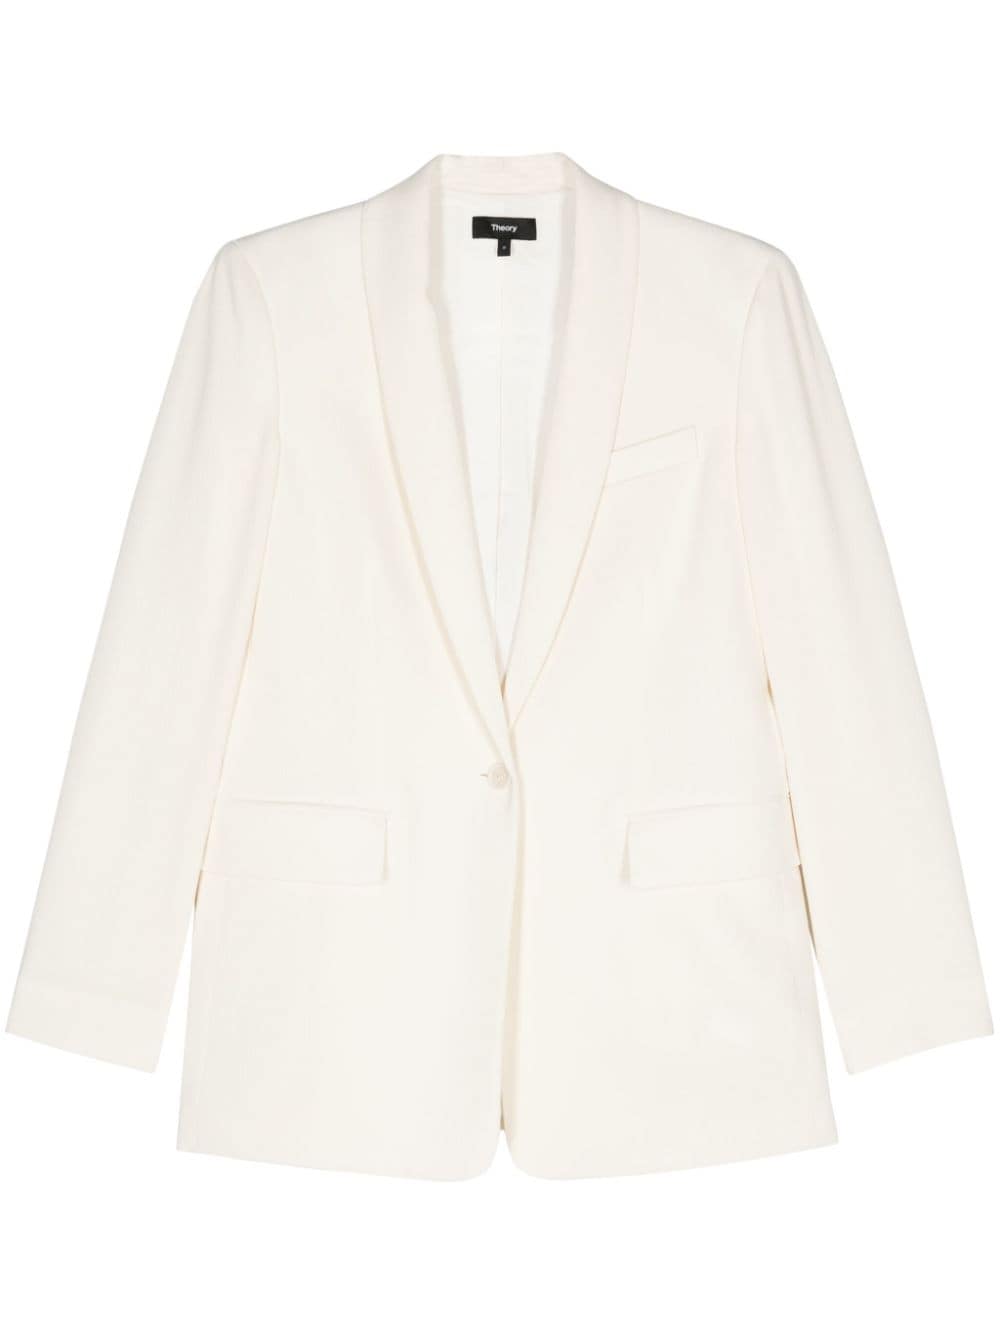 Theory crepe single-breasted blazer - White von Theory